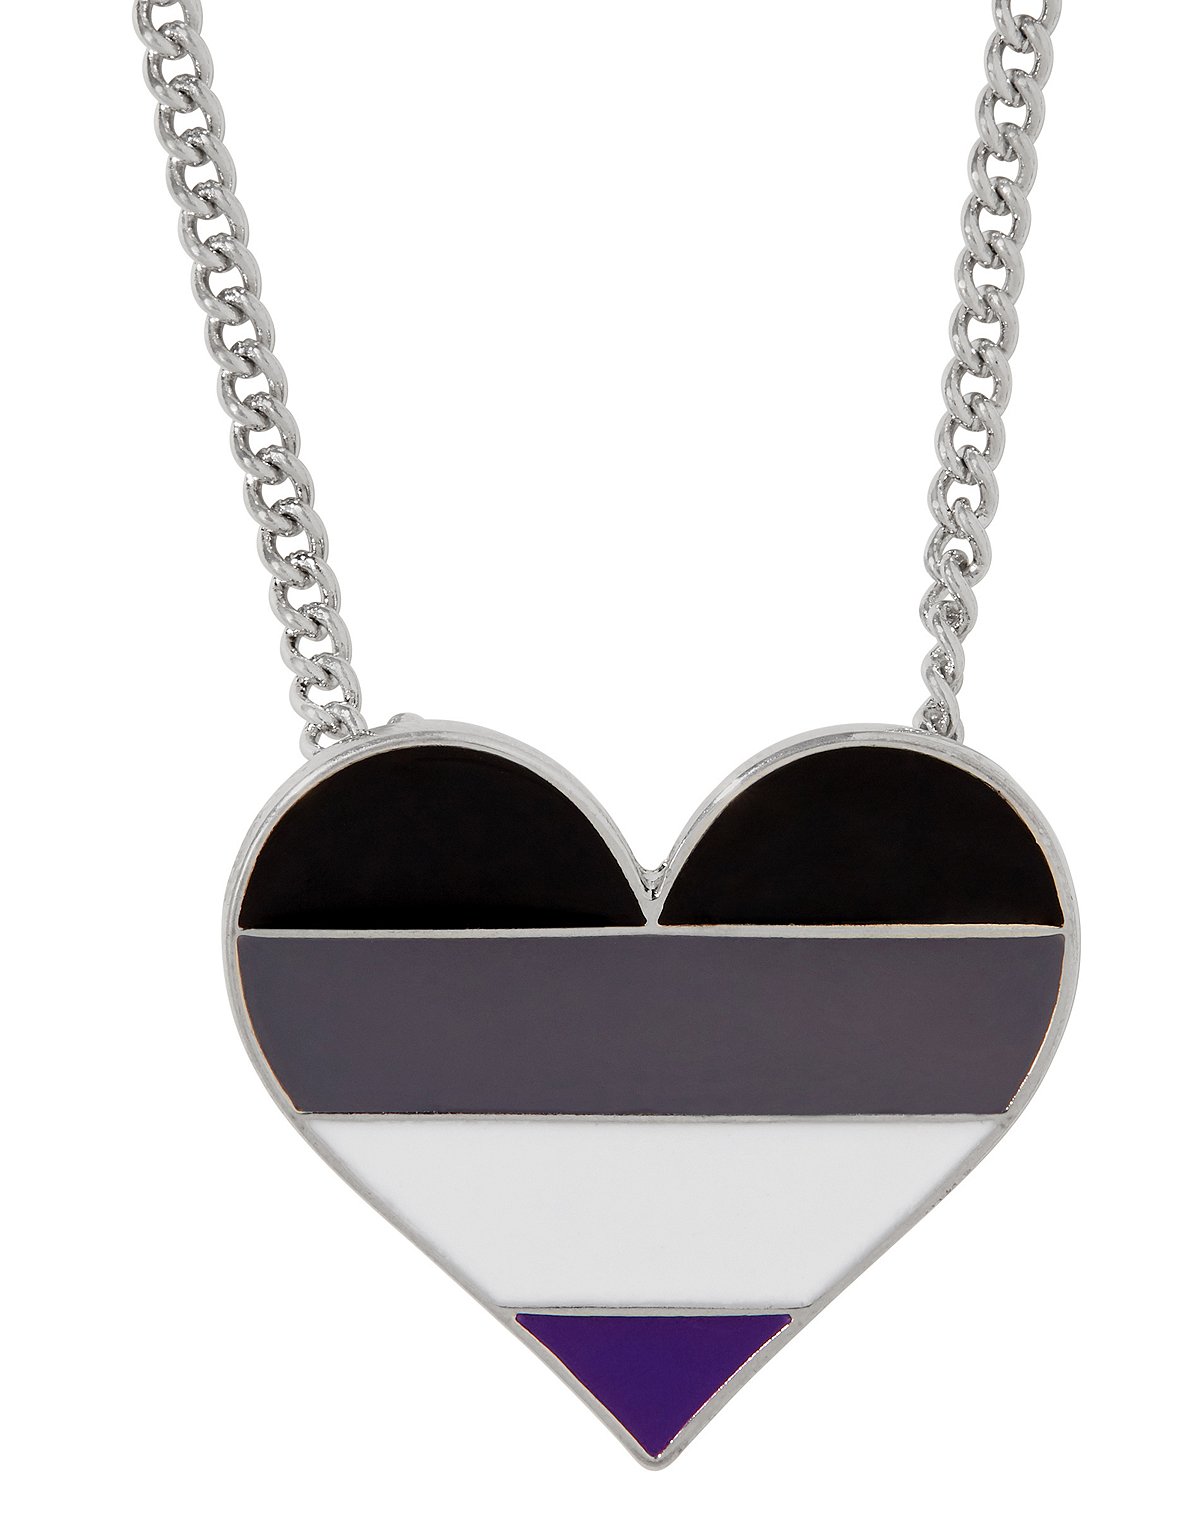 Asexual Pride Heart Necklace